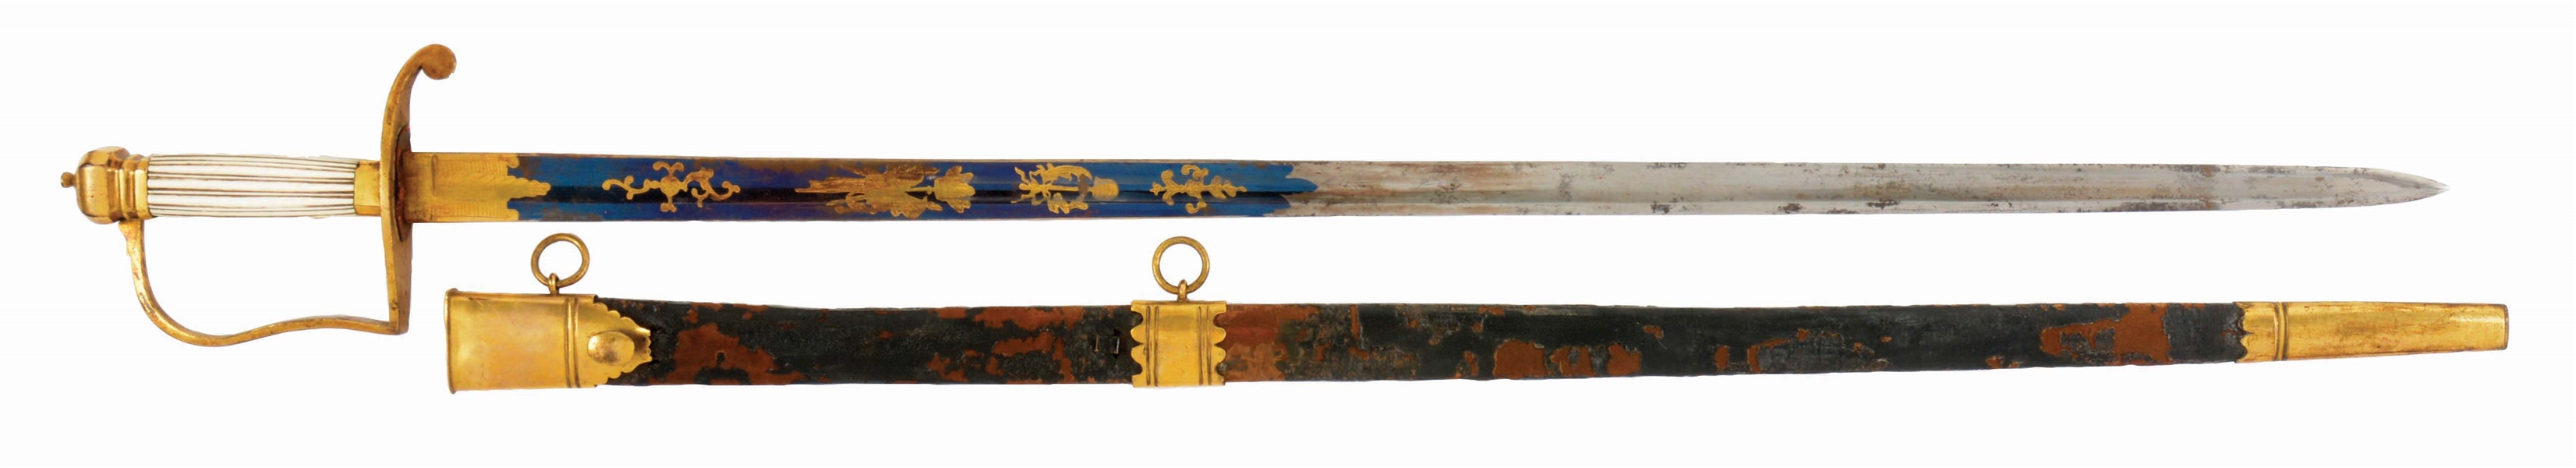 FINE GILT BRASS INFANTRY OFFICERS SPADROON MARKED WOOLEY DEAKON WITH SCABBARD.